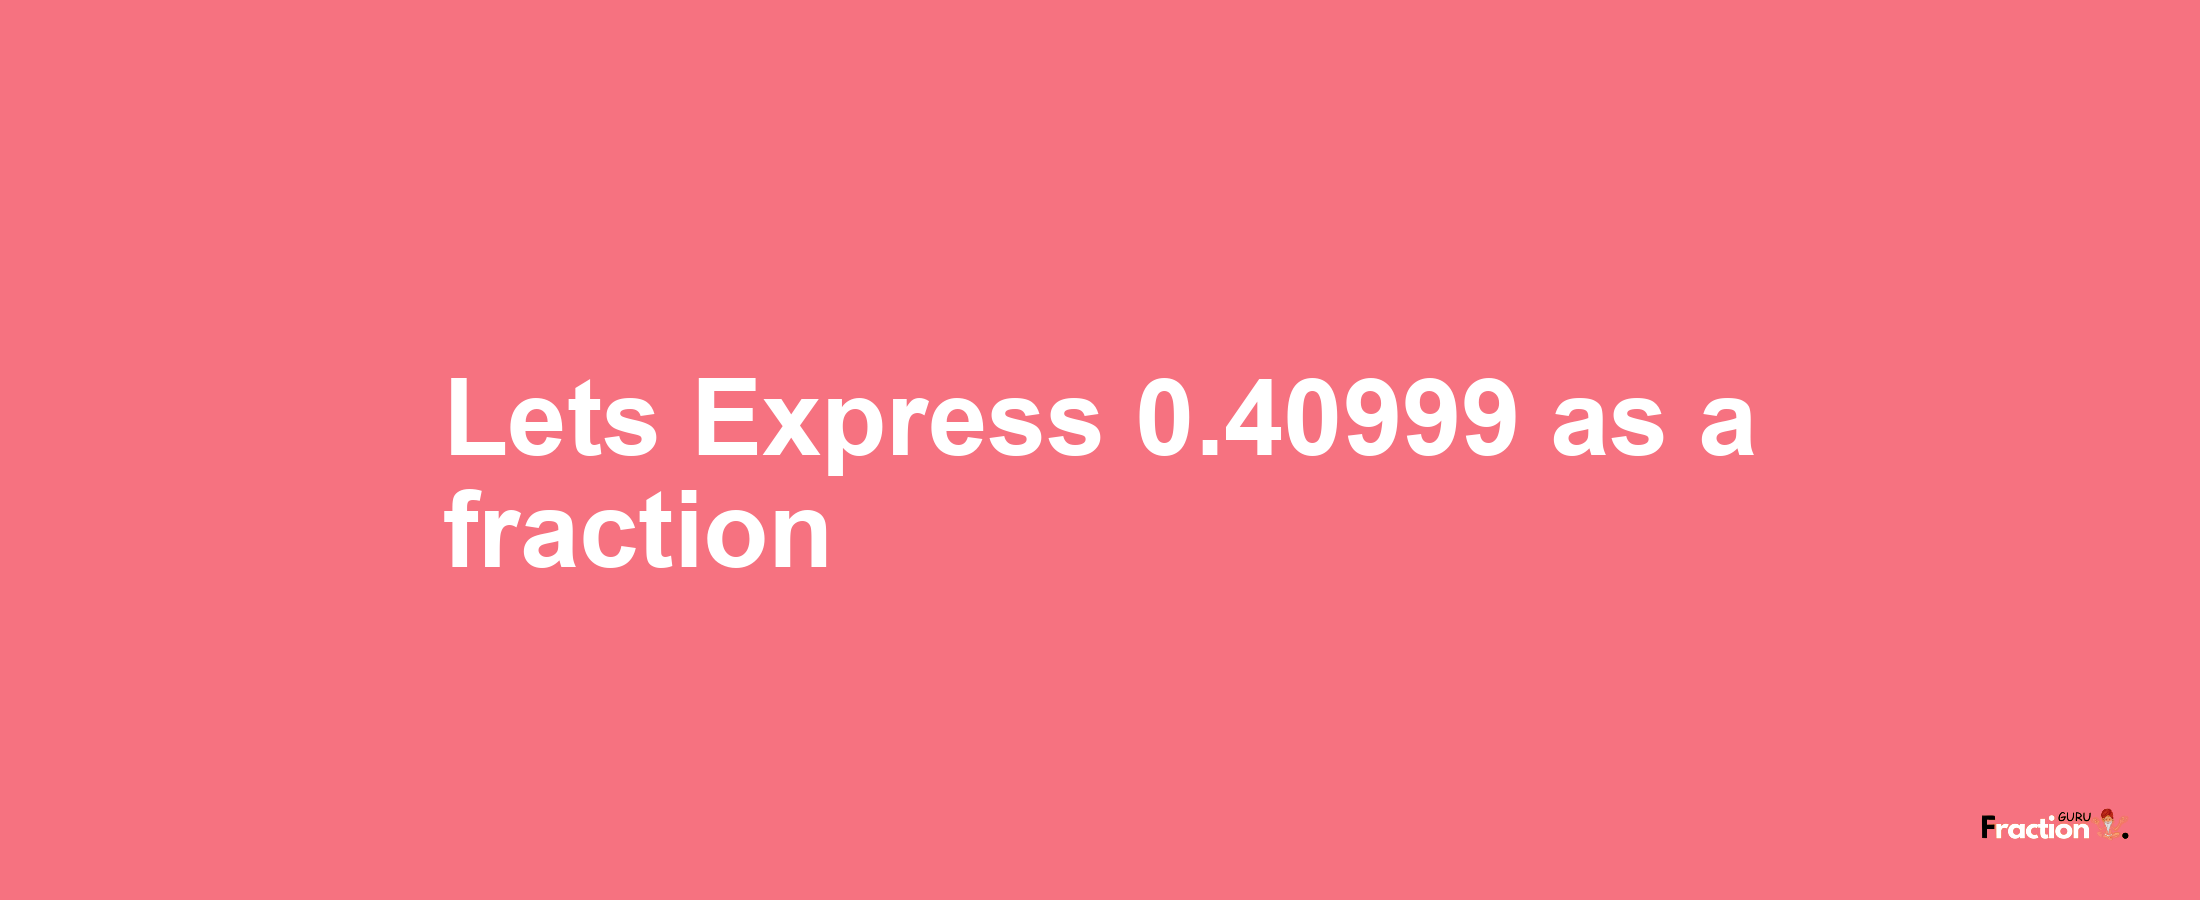 Lets Express 0.40999 as afraction